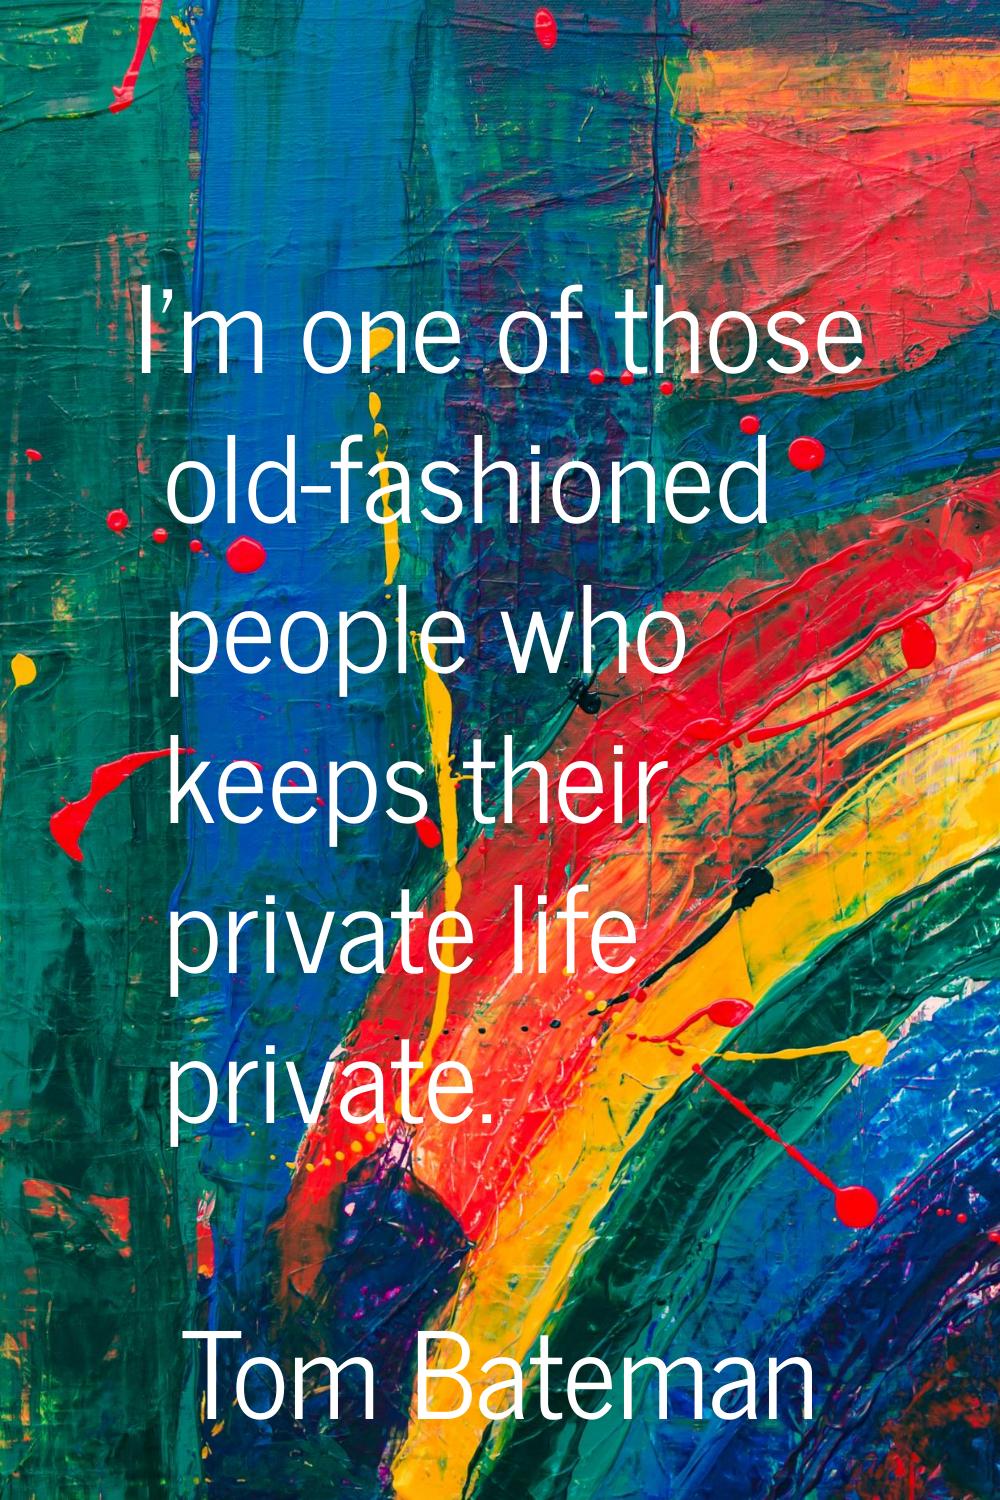 I'm one of those old-fashioned people who keeps their private life private.